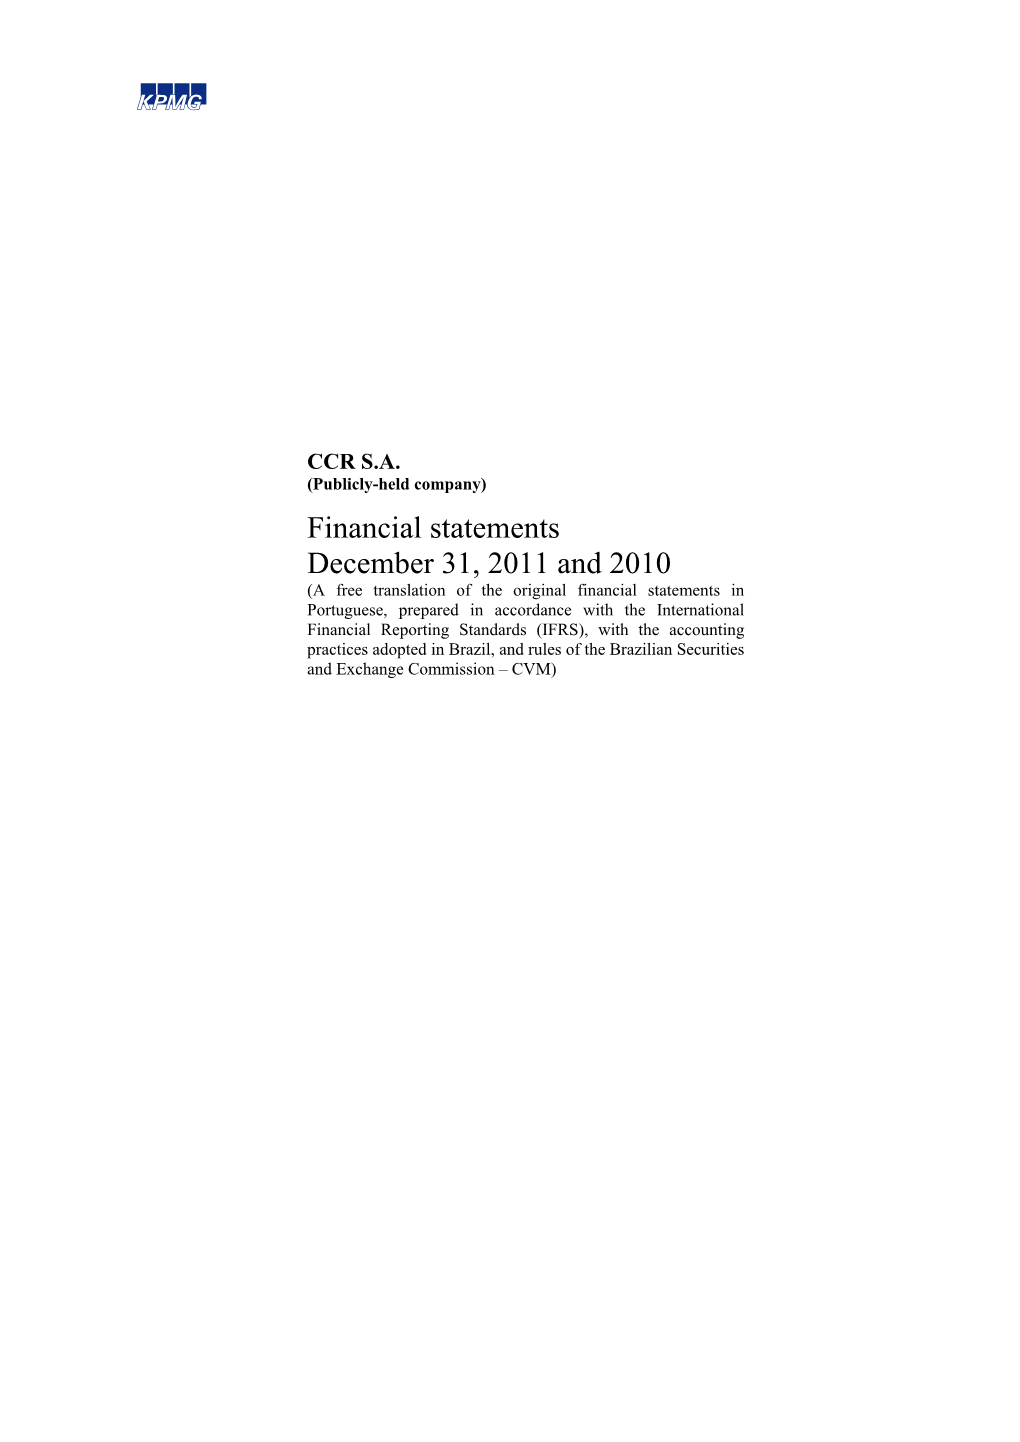 Financial Statements December 31, 2011 and 2010